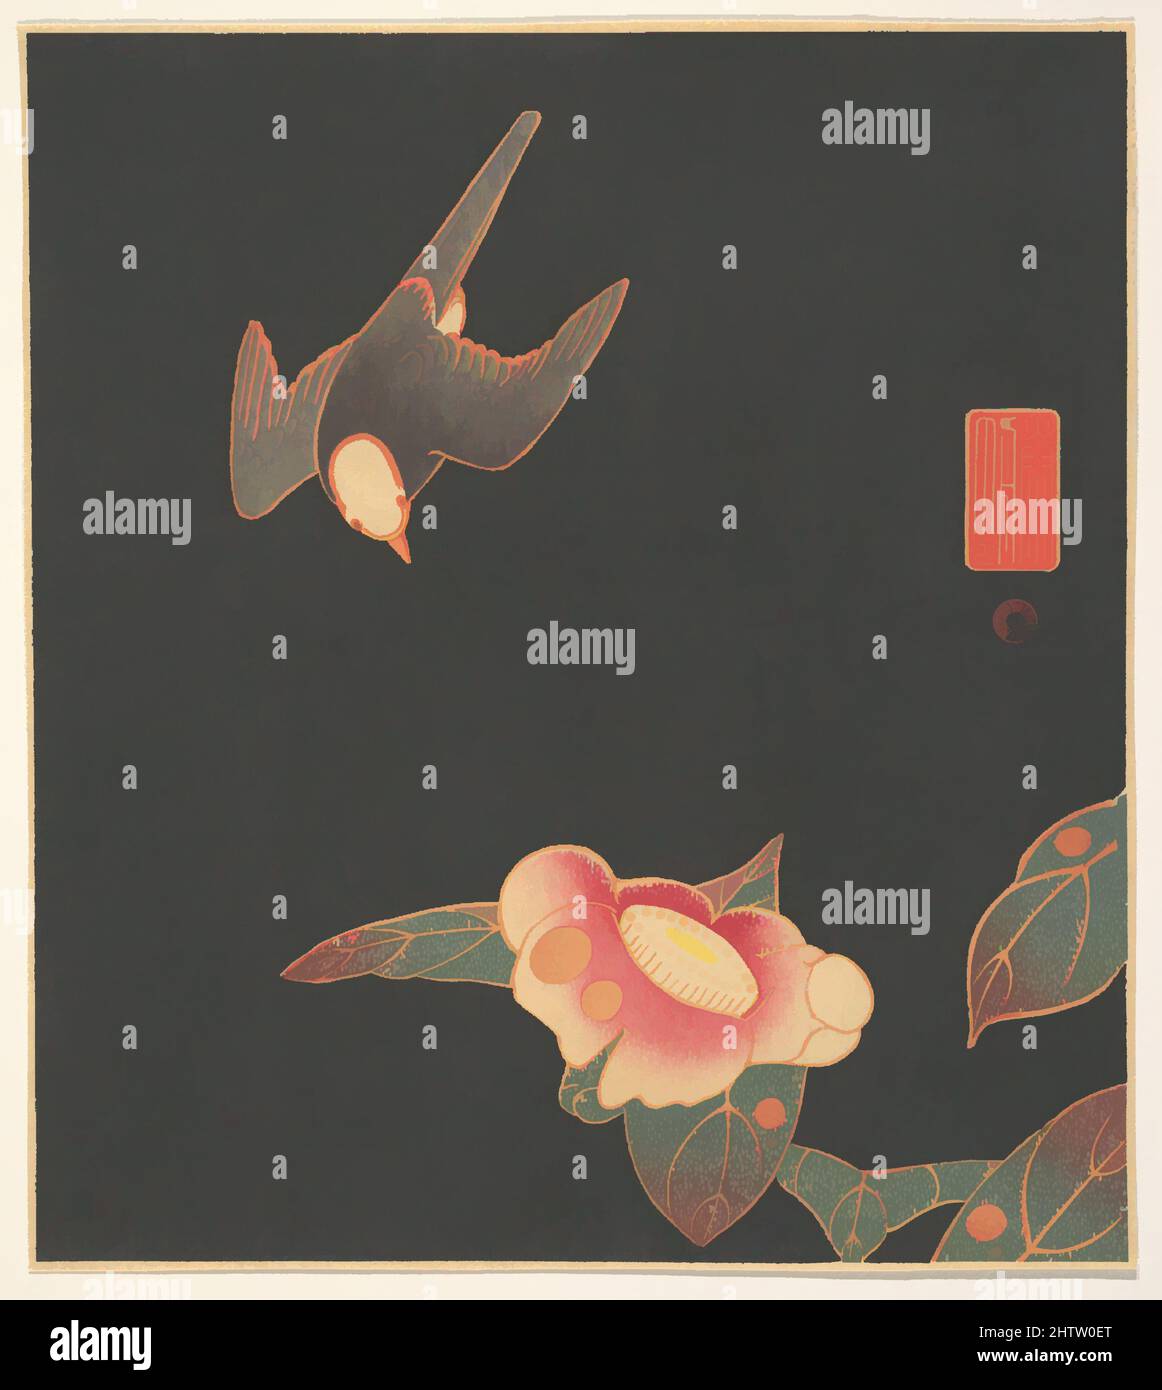 Art inspired by Swallow and Camellia, Meiji period (1868–1912), ca. 1900, Japan, Polychrome woodblock print; ink and color on paper, 9 1/4 x 8 1/4 in. (23.5 x 21 cm), Prints, Itō Jakuchū (Japanese, 1716–1800, Classic works modernized by Artotop with a splash of modernity. Shapes, color and value, eye-catching visual impact on art. Emotions through freedom of artworks in a contemporary way. A timeless message pursuing a wildly creative new direction. Artists turning to the digital medium and creating the Artotop NFT Stock Photo